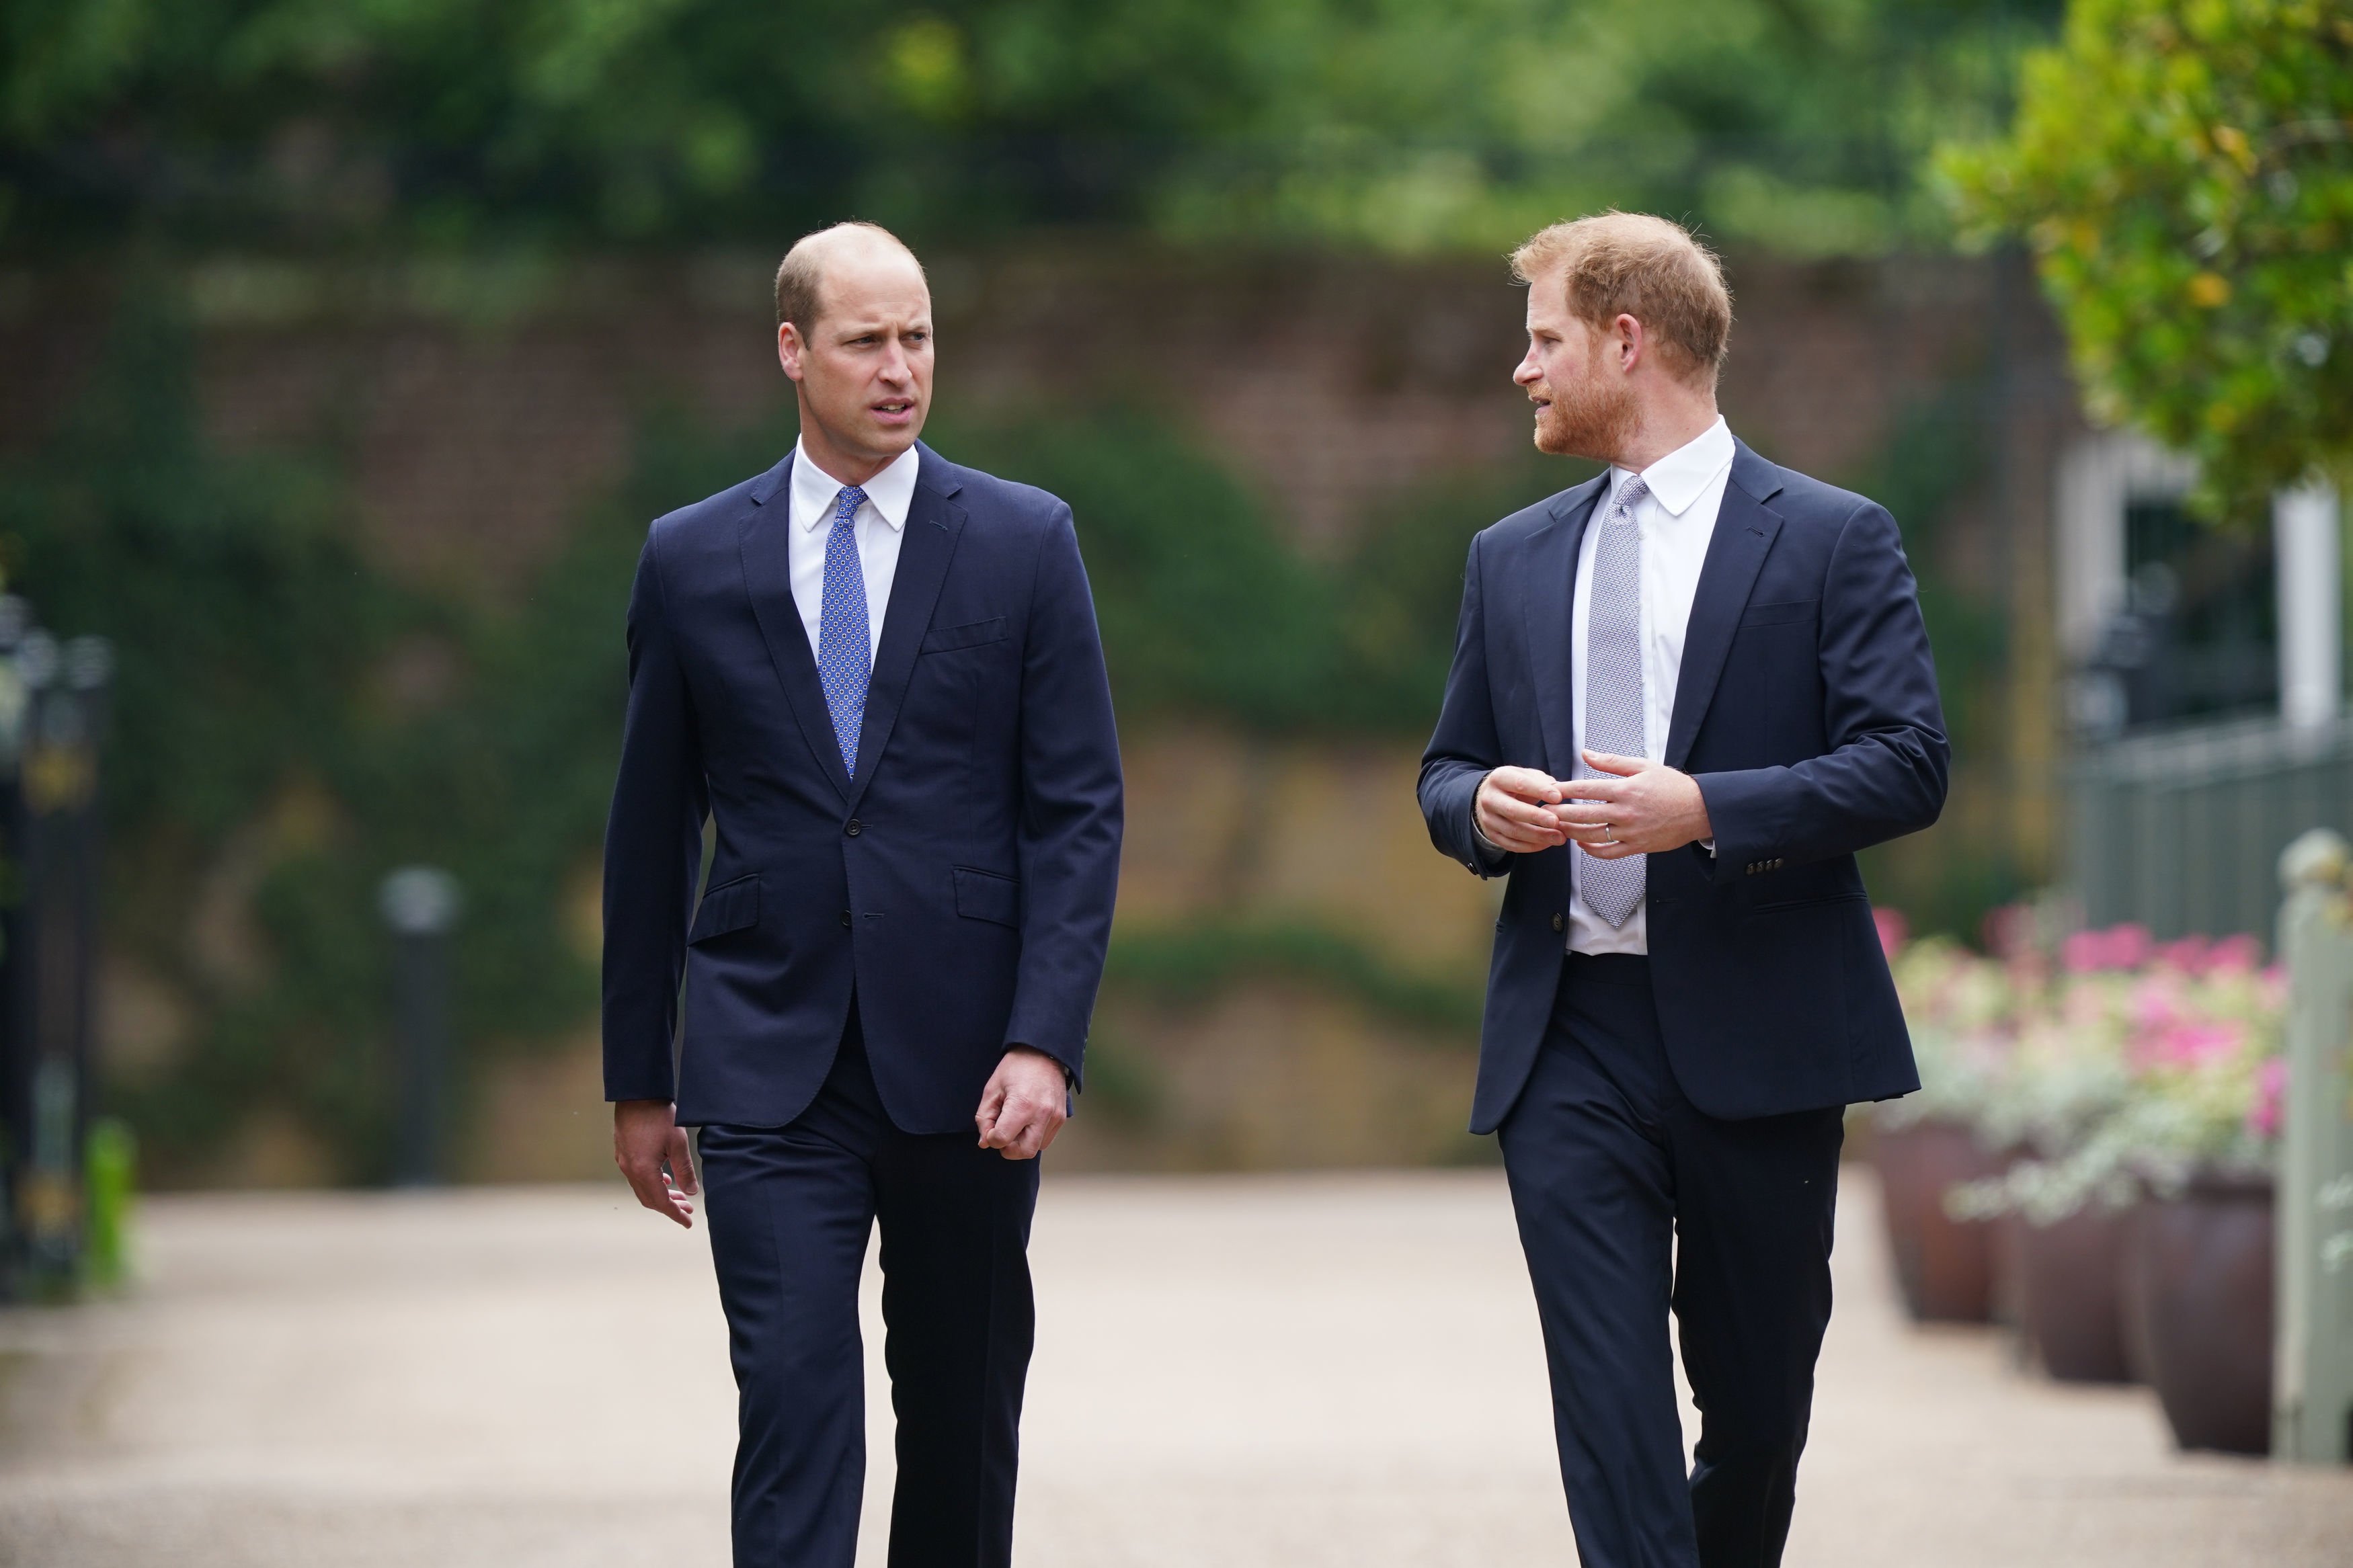 Prince William and Prince Harry arriving for the unveiling of a statue of their mother, Diana, Princess of Wales, in the Sunken Garden at Kensington Palace on July 1, 2021 in London, England. / Source: Getty Images